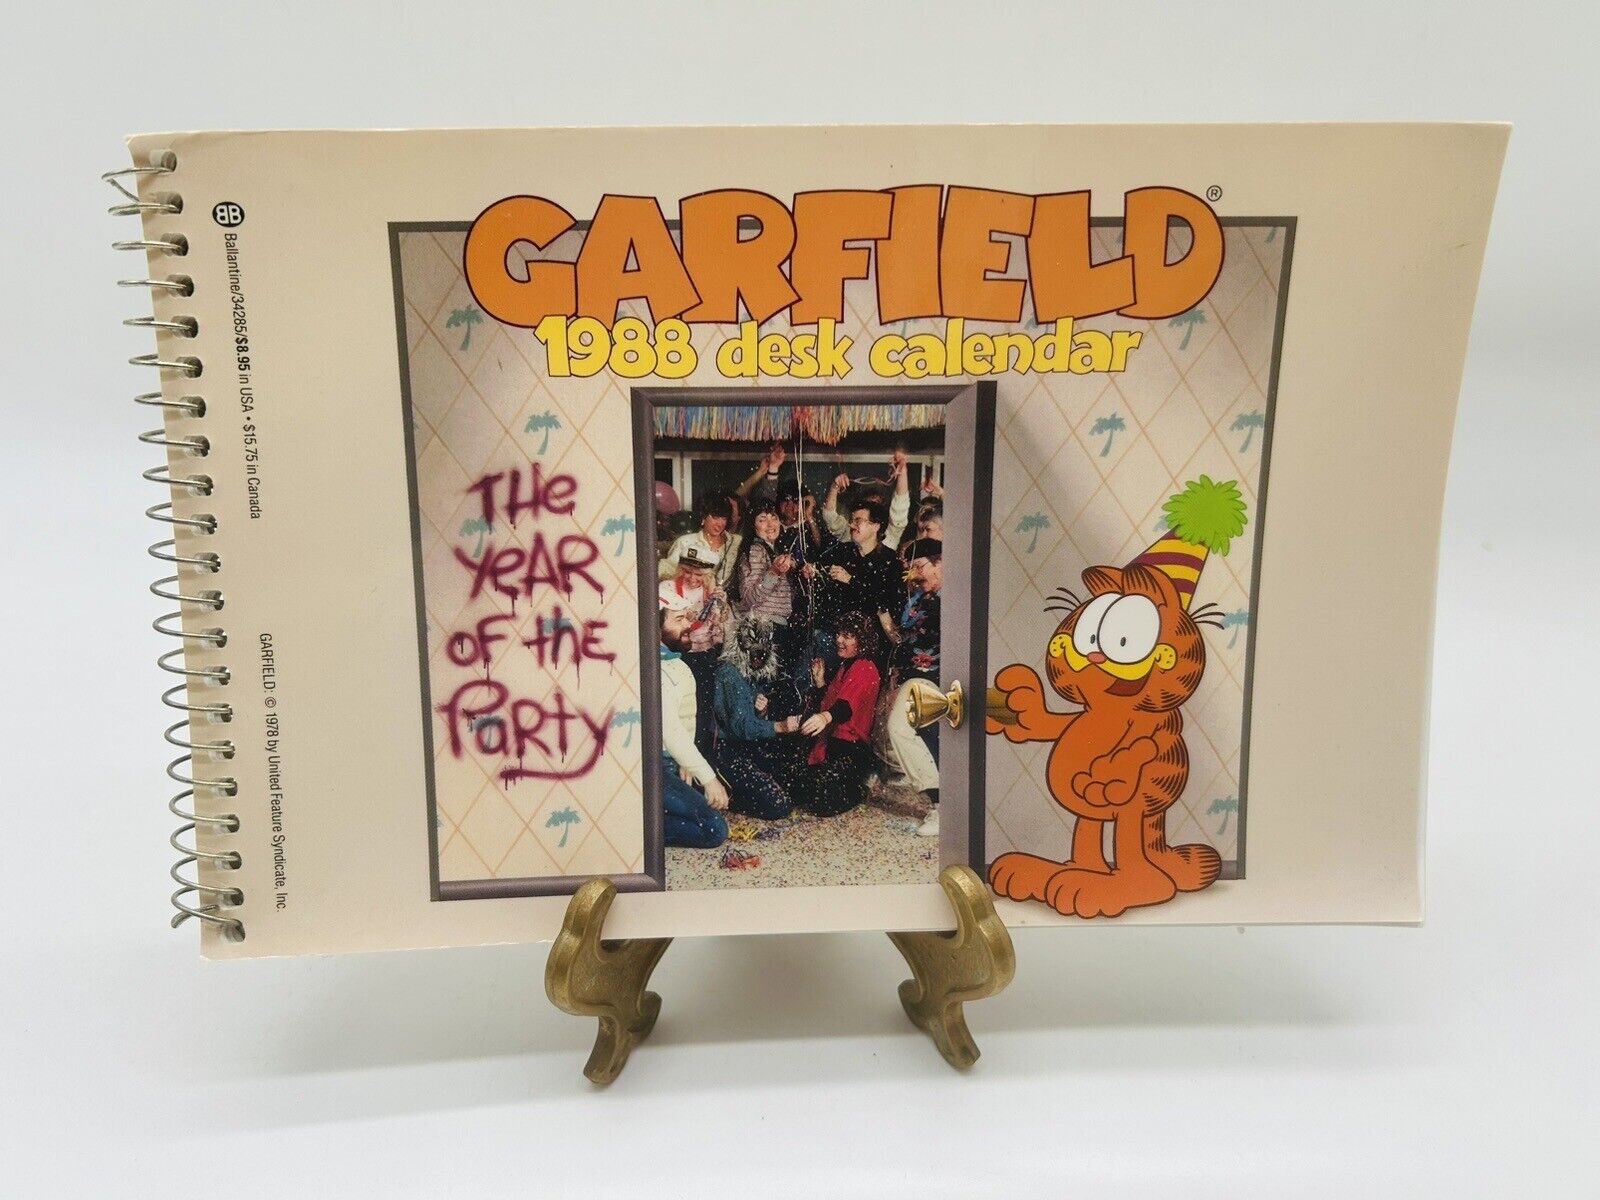 Vintage Garfield 1988 Desk Calendar Unused “The Year Of The Party”